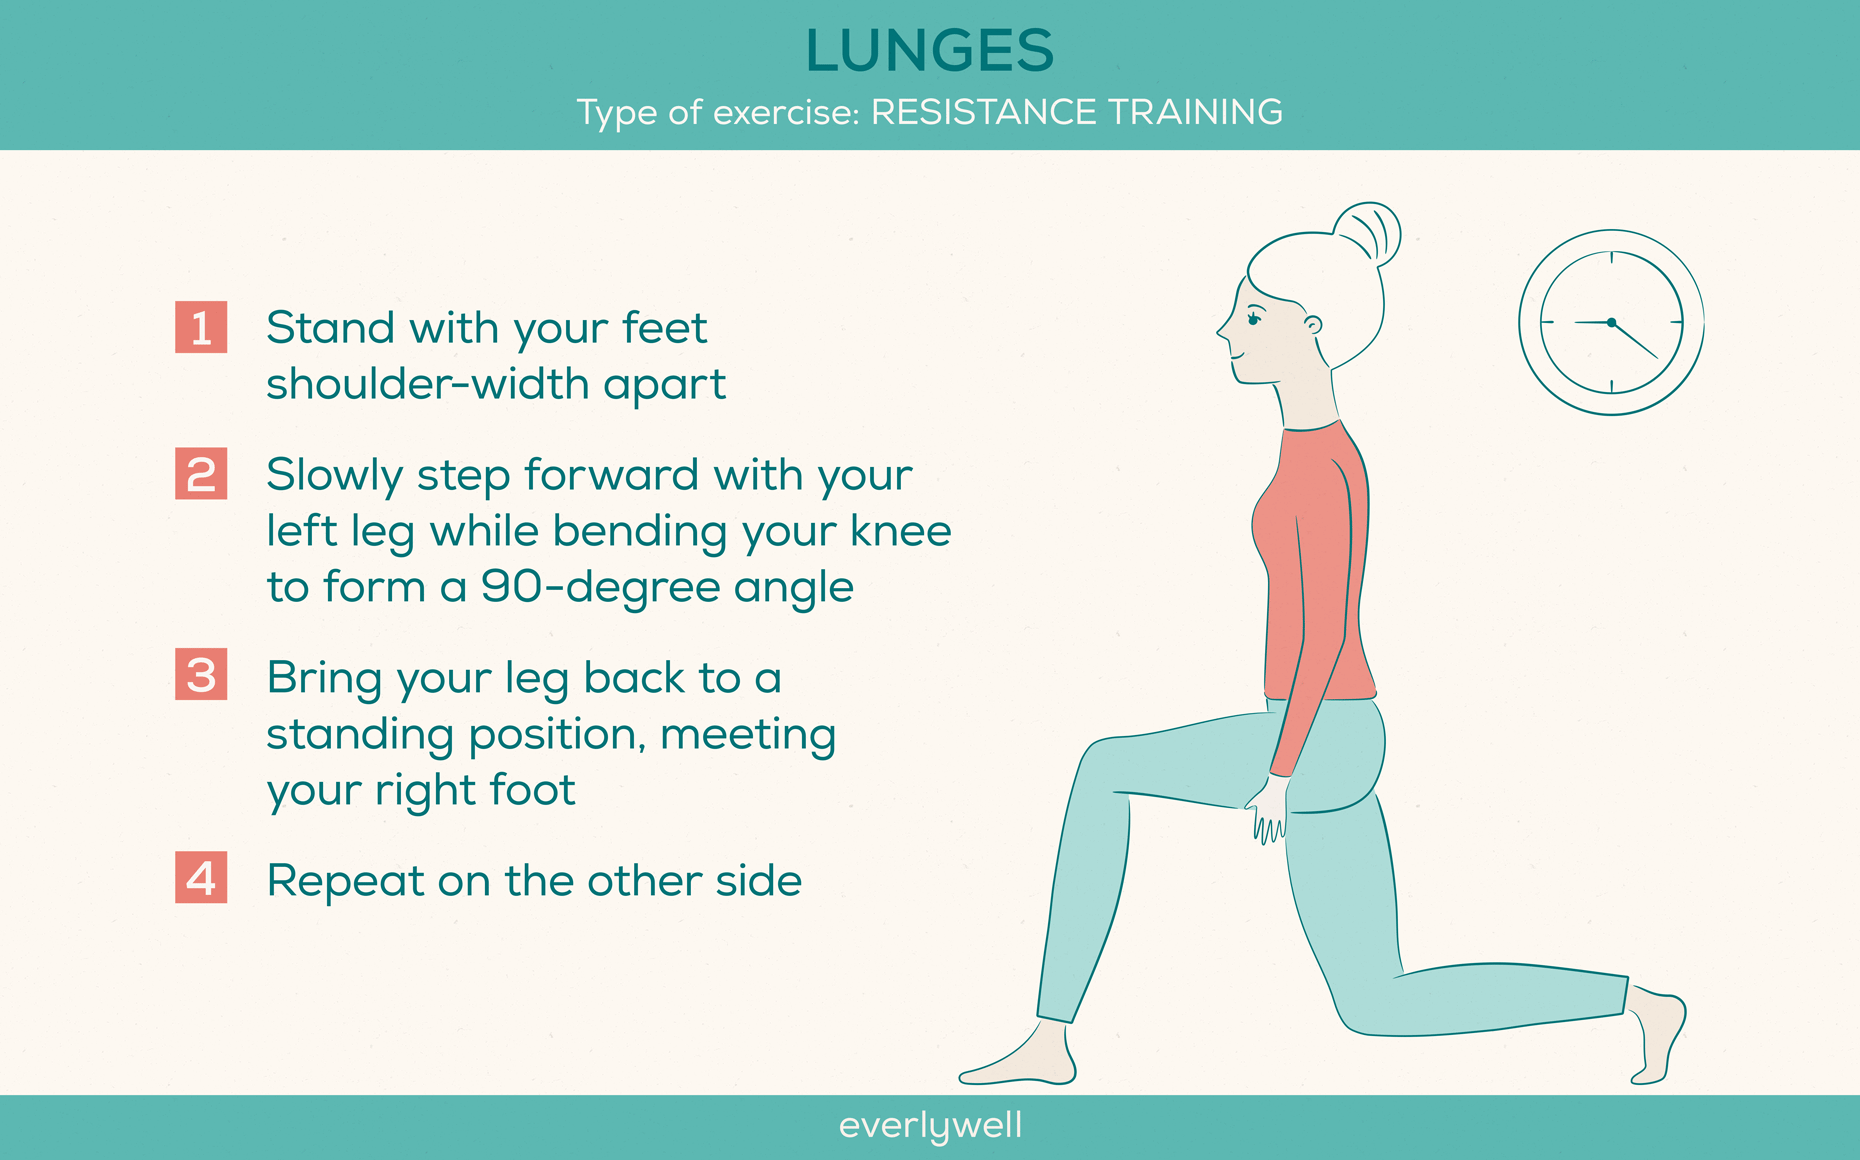 heart-healthy-exercises-lunges-logo